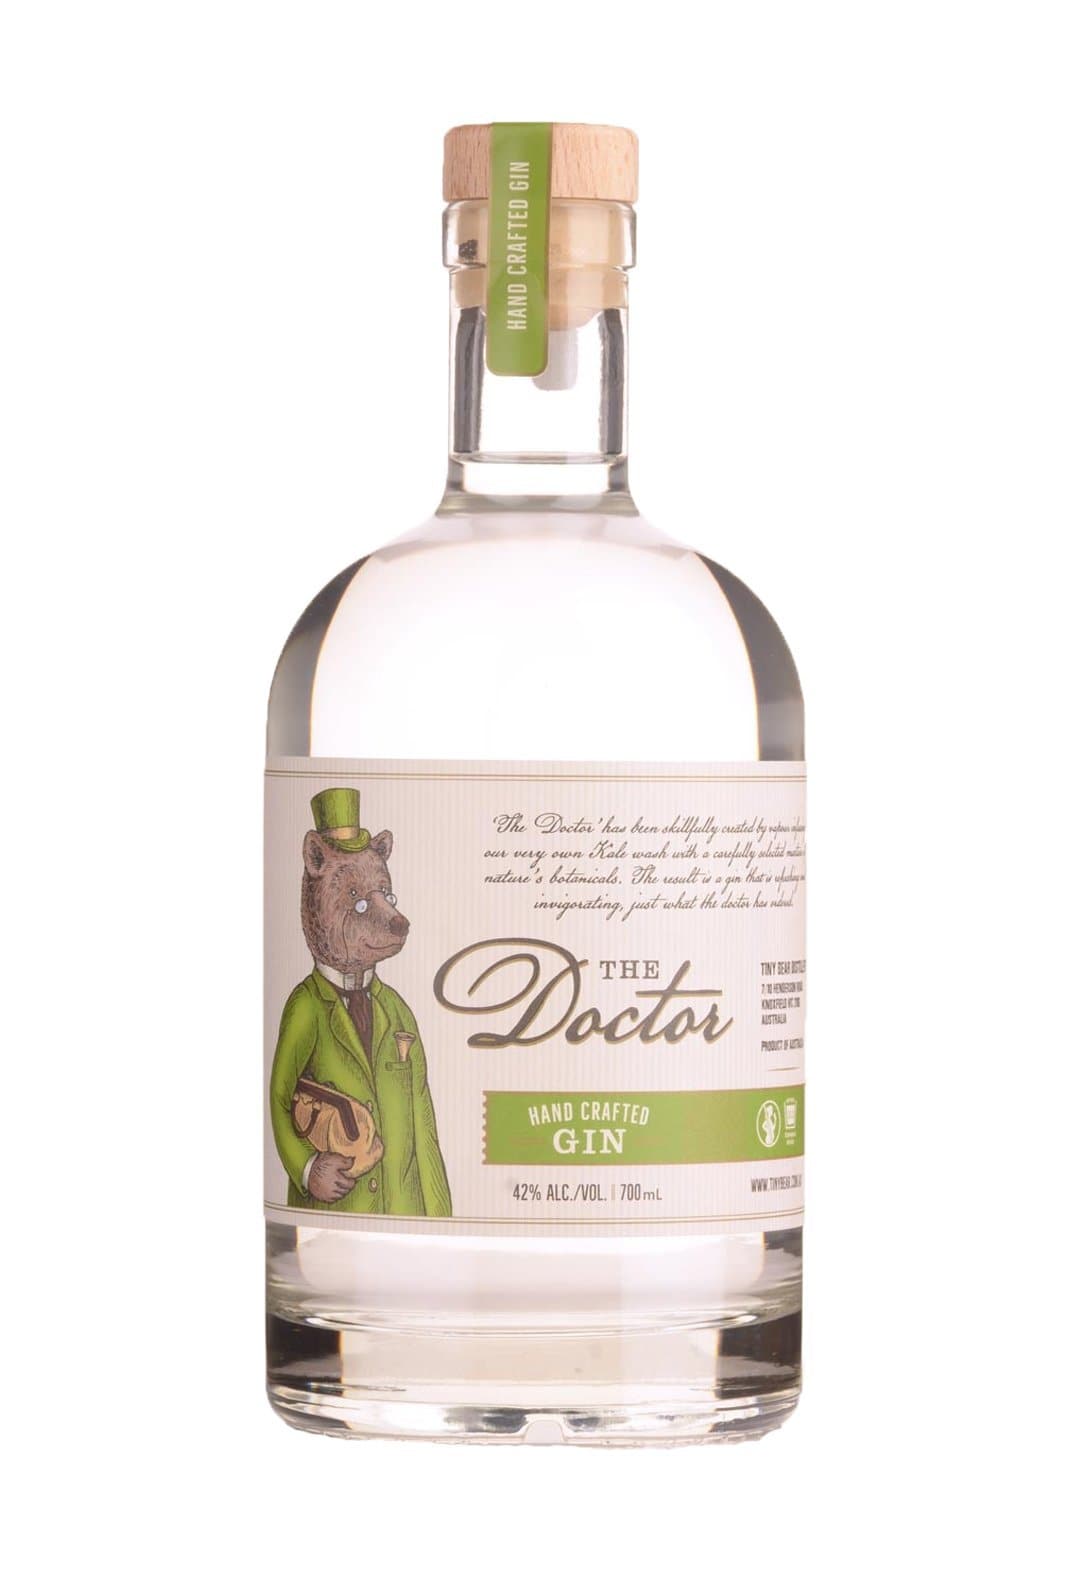 Tiny Bear The Doctor 42% 700ml | Gin | Shop online at Spirits of France